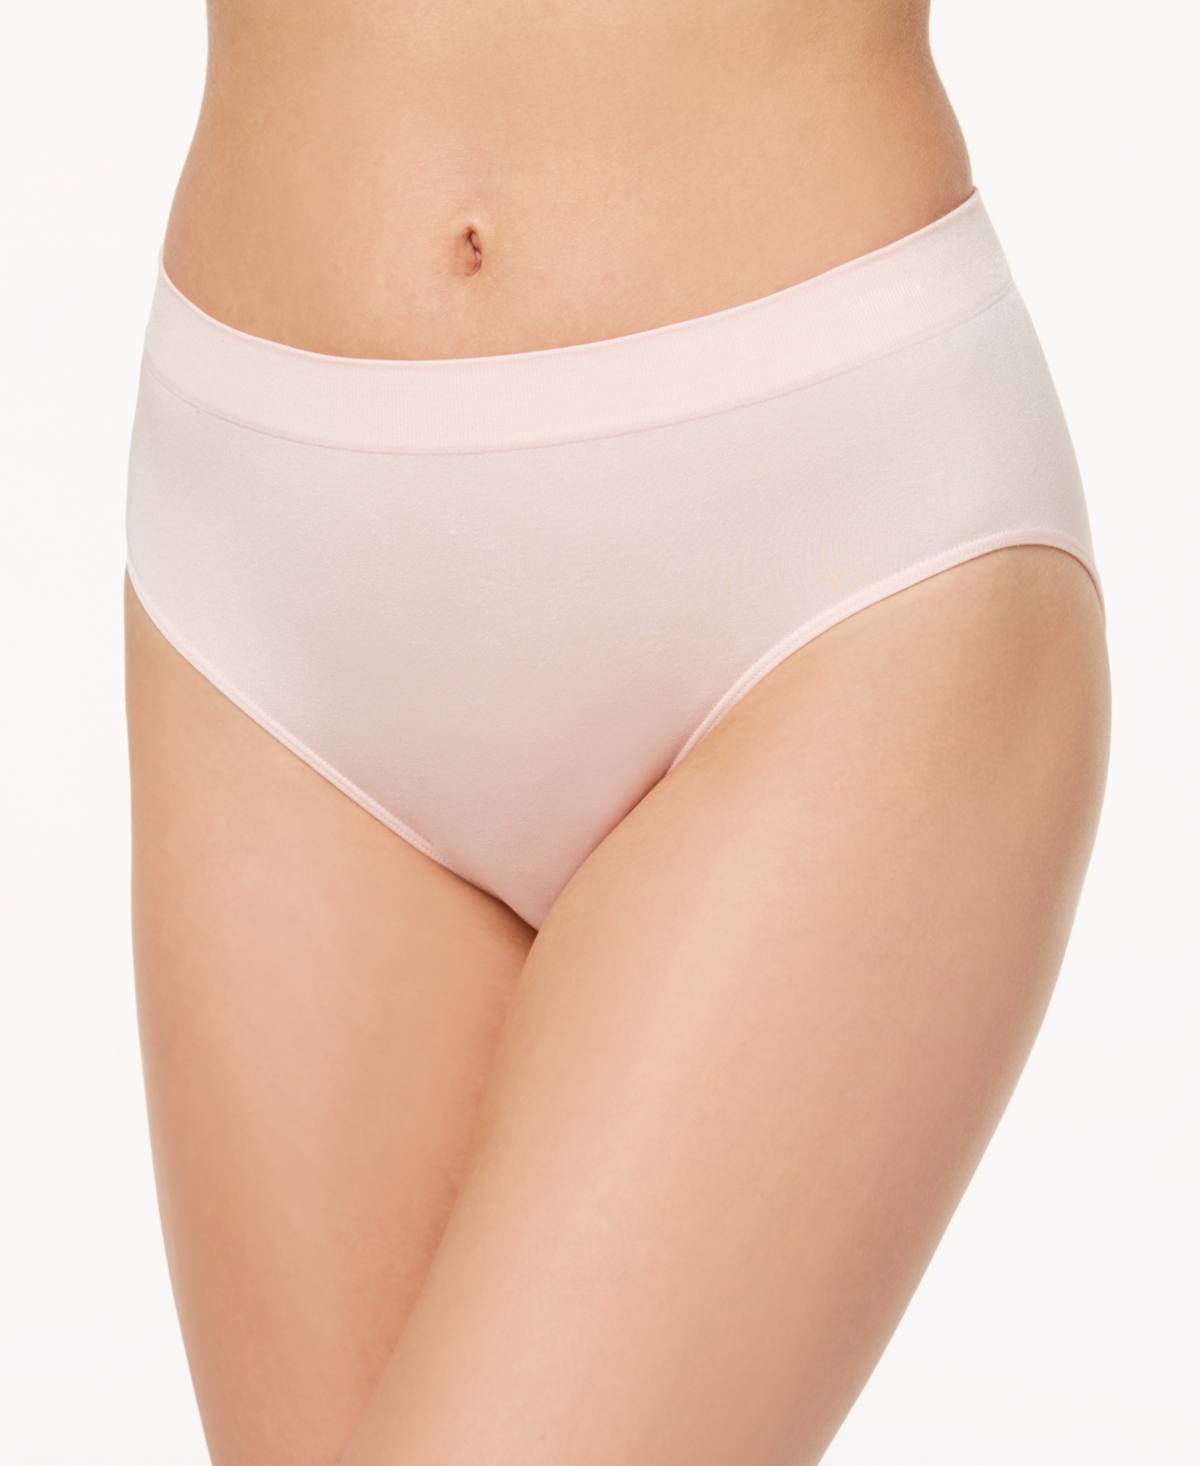 UPC 719544701600 product image for Wacoal Women's B-Smooth High-Cut Brief Underwear 834175 | upcitemdb.com